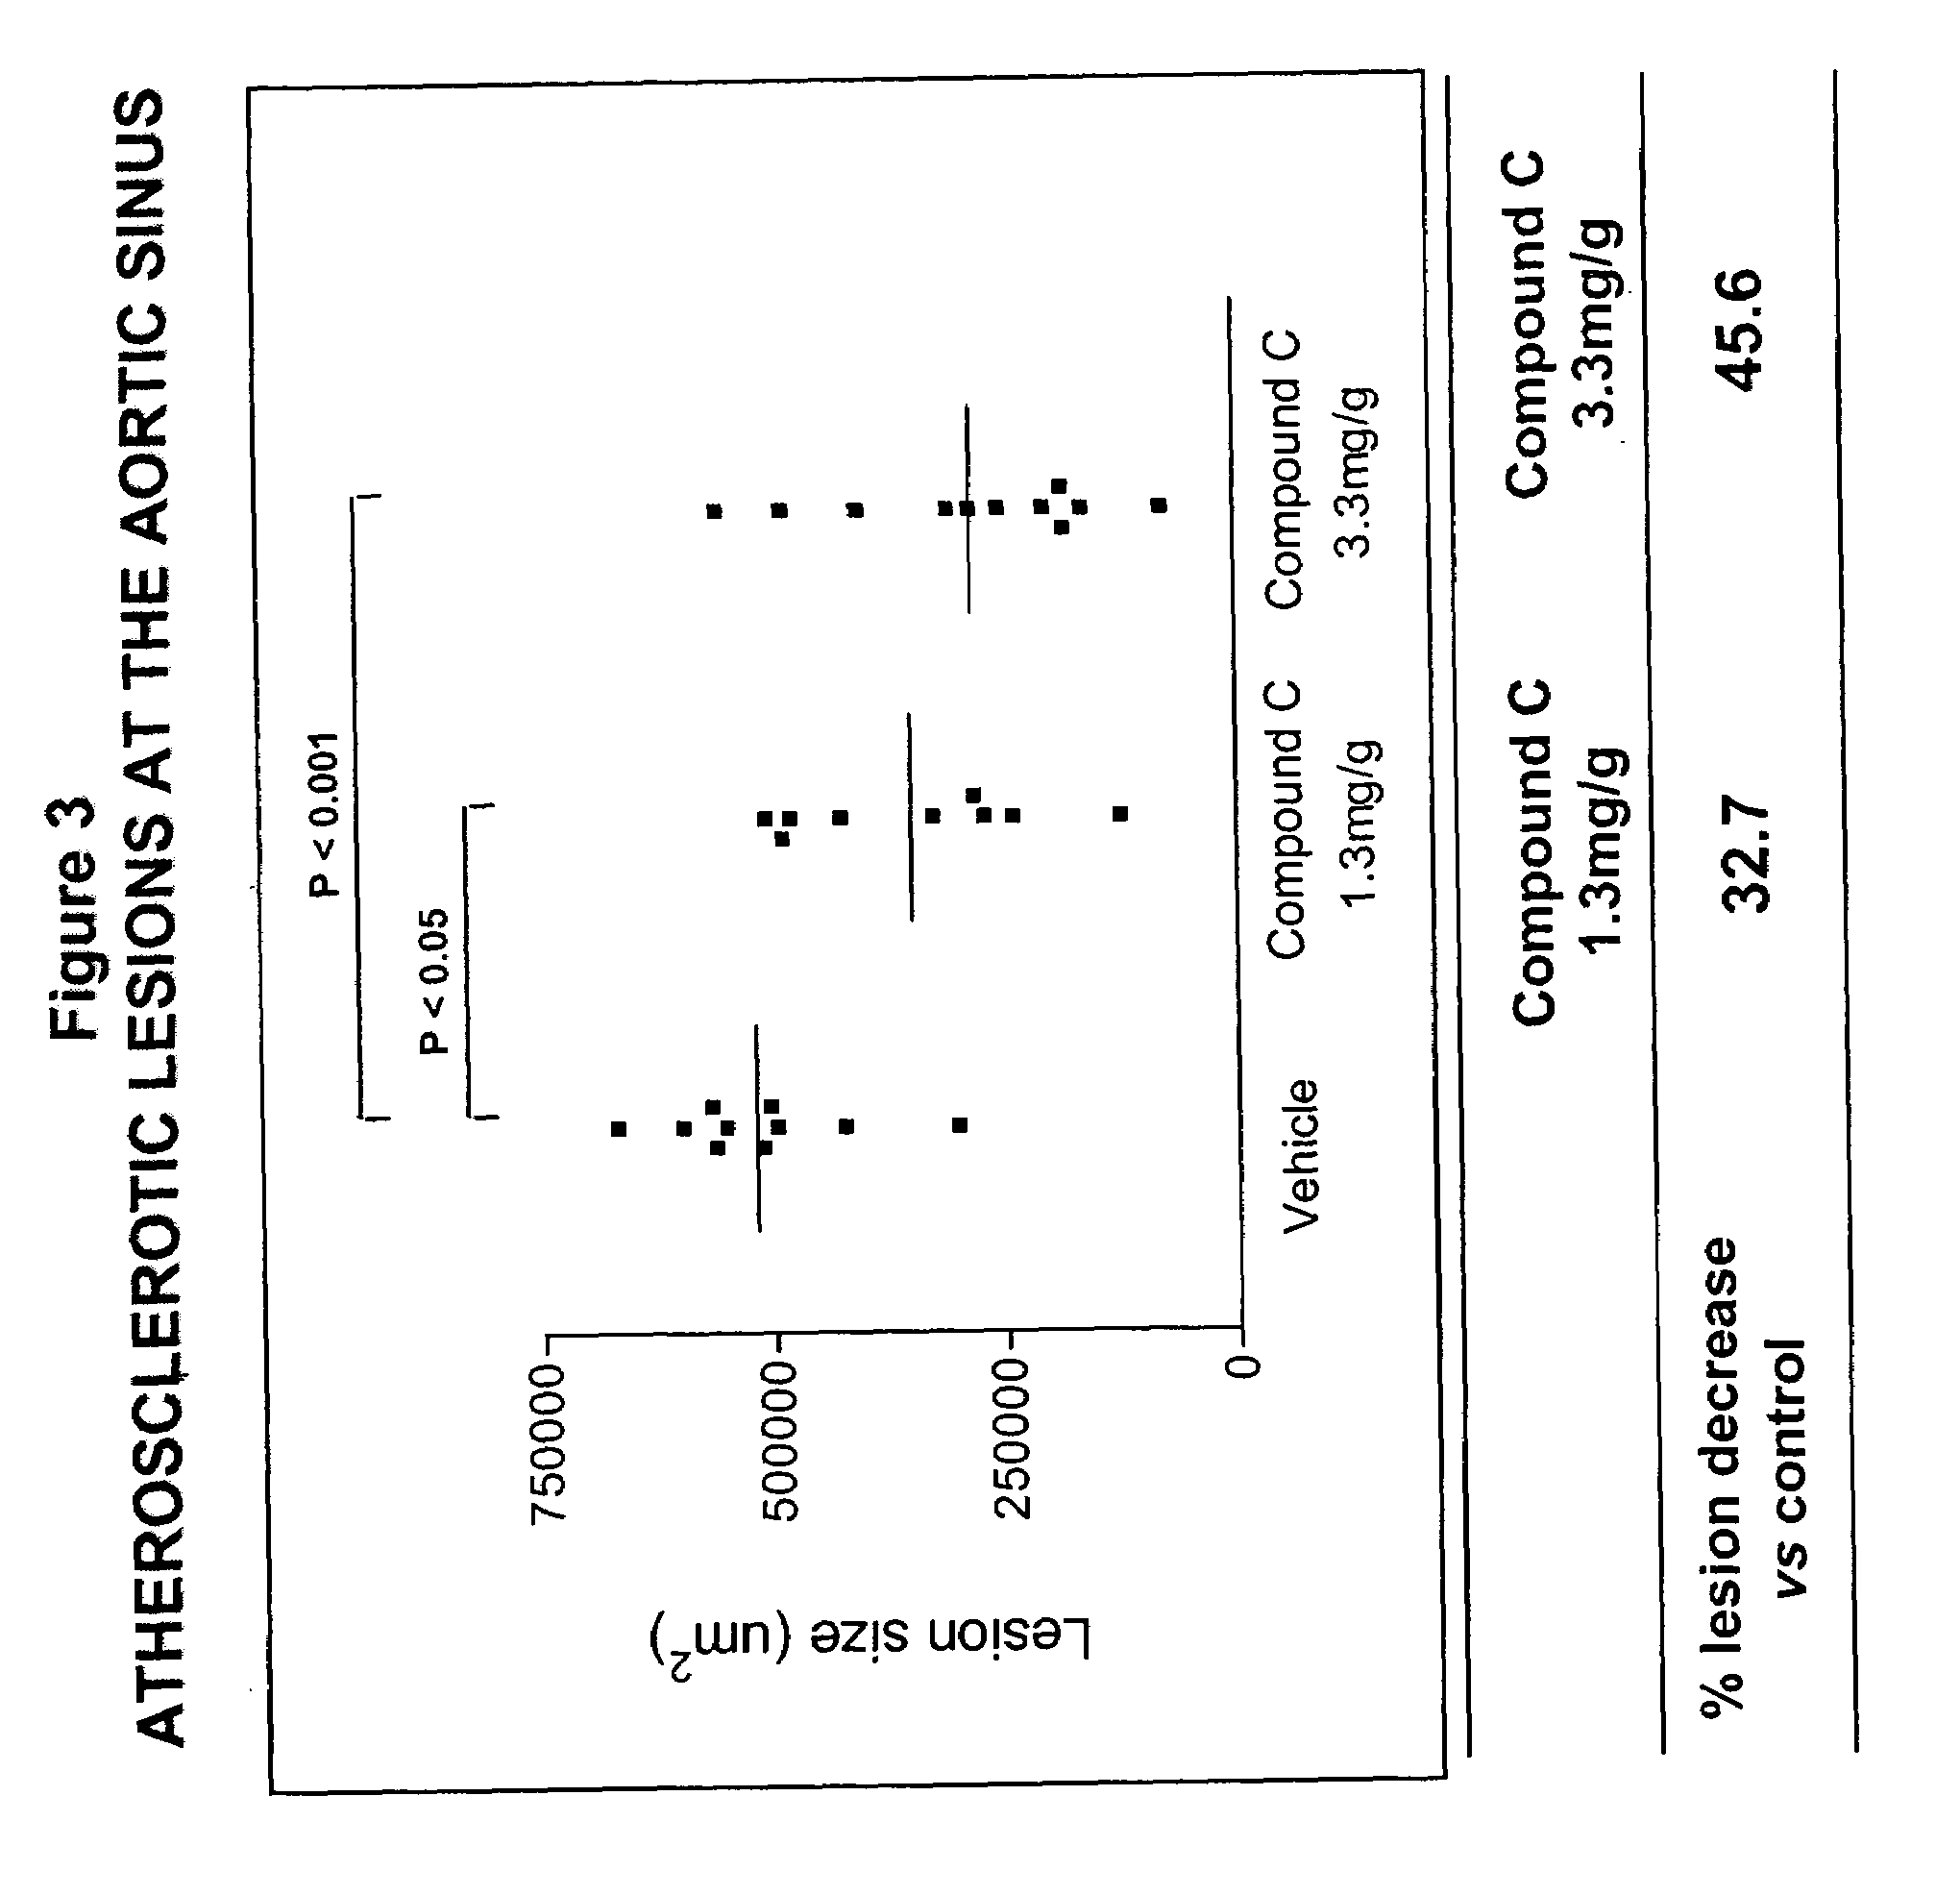 Methods for the use of inhibitors of cytosolic phospholipase A2